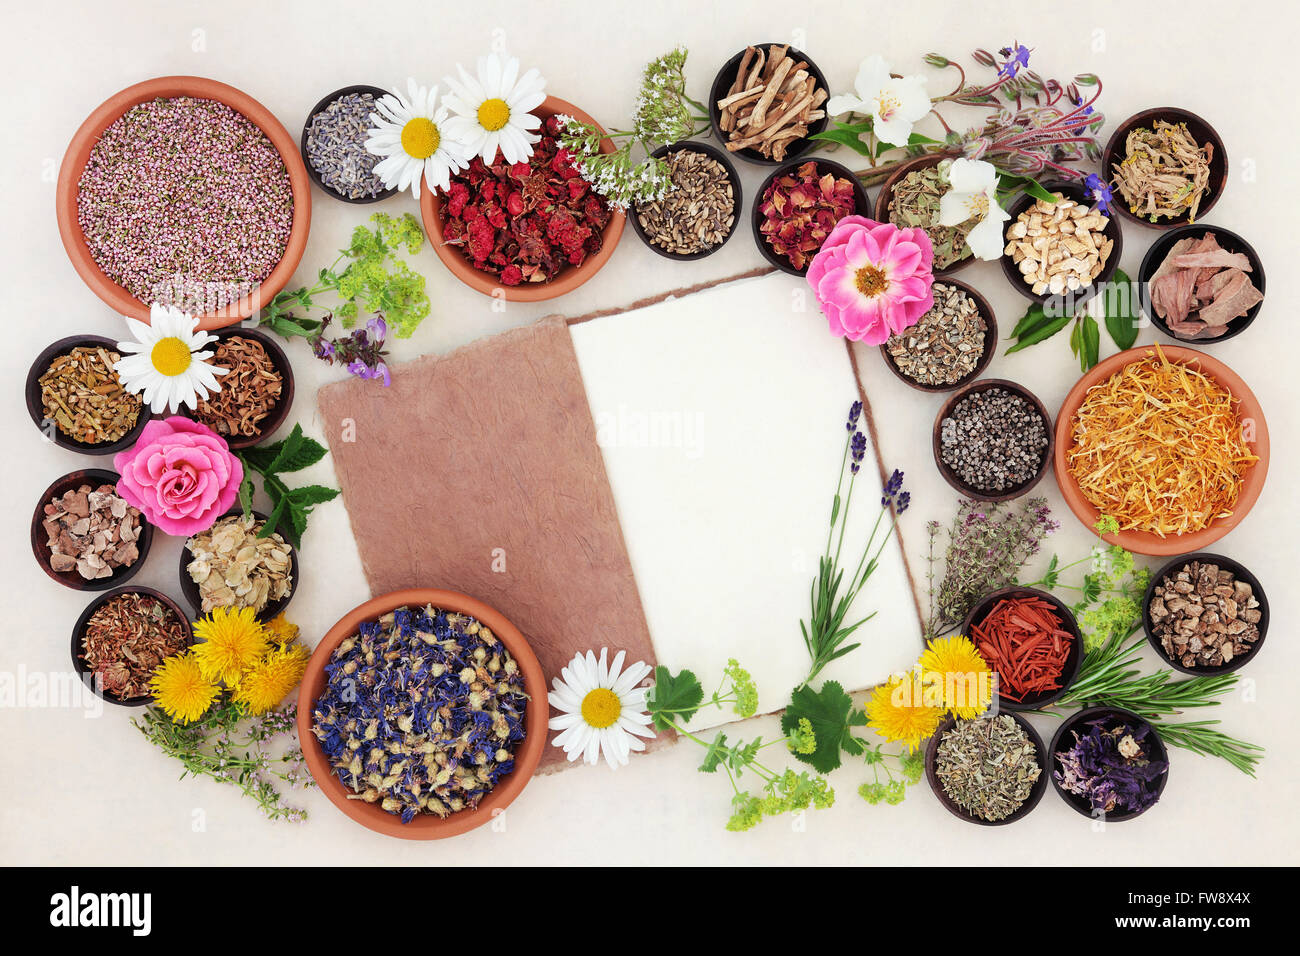 Health care using herbal medicine flower and herb selection with hemp notebook over cream paper background. Stock Photo